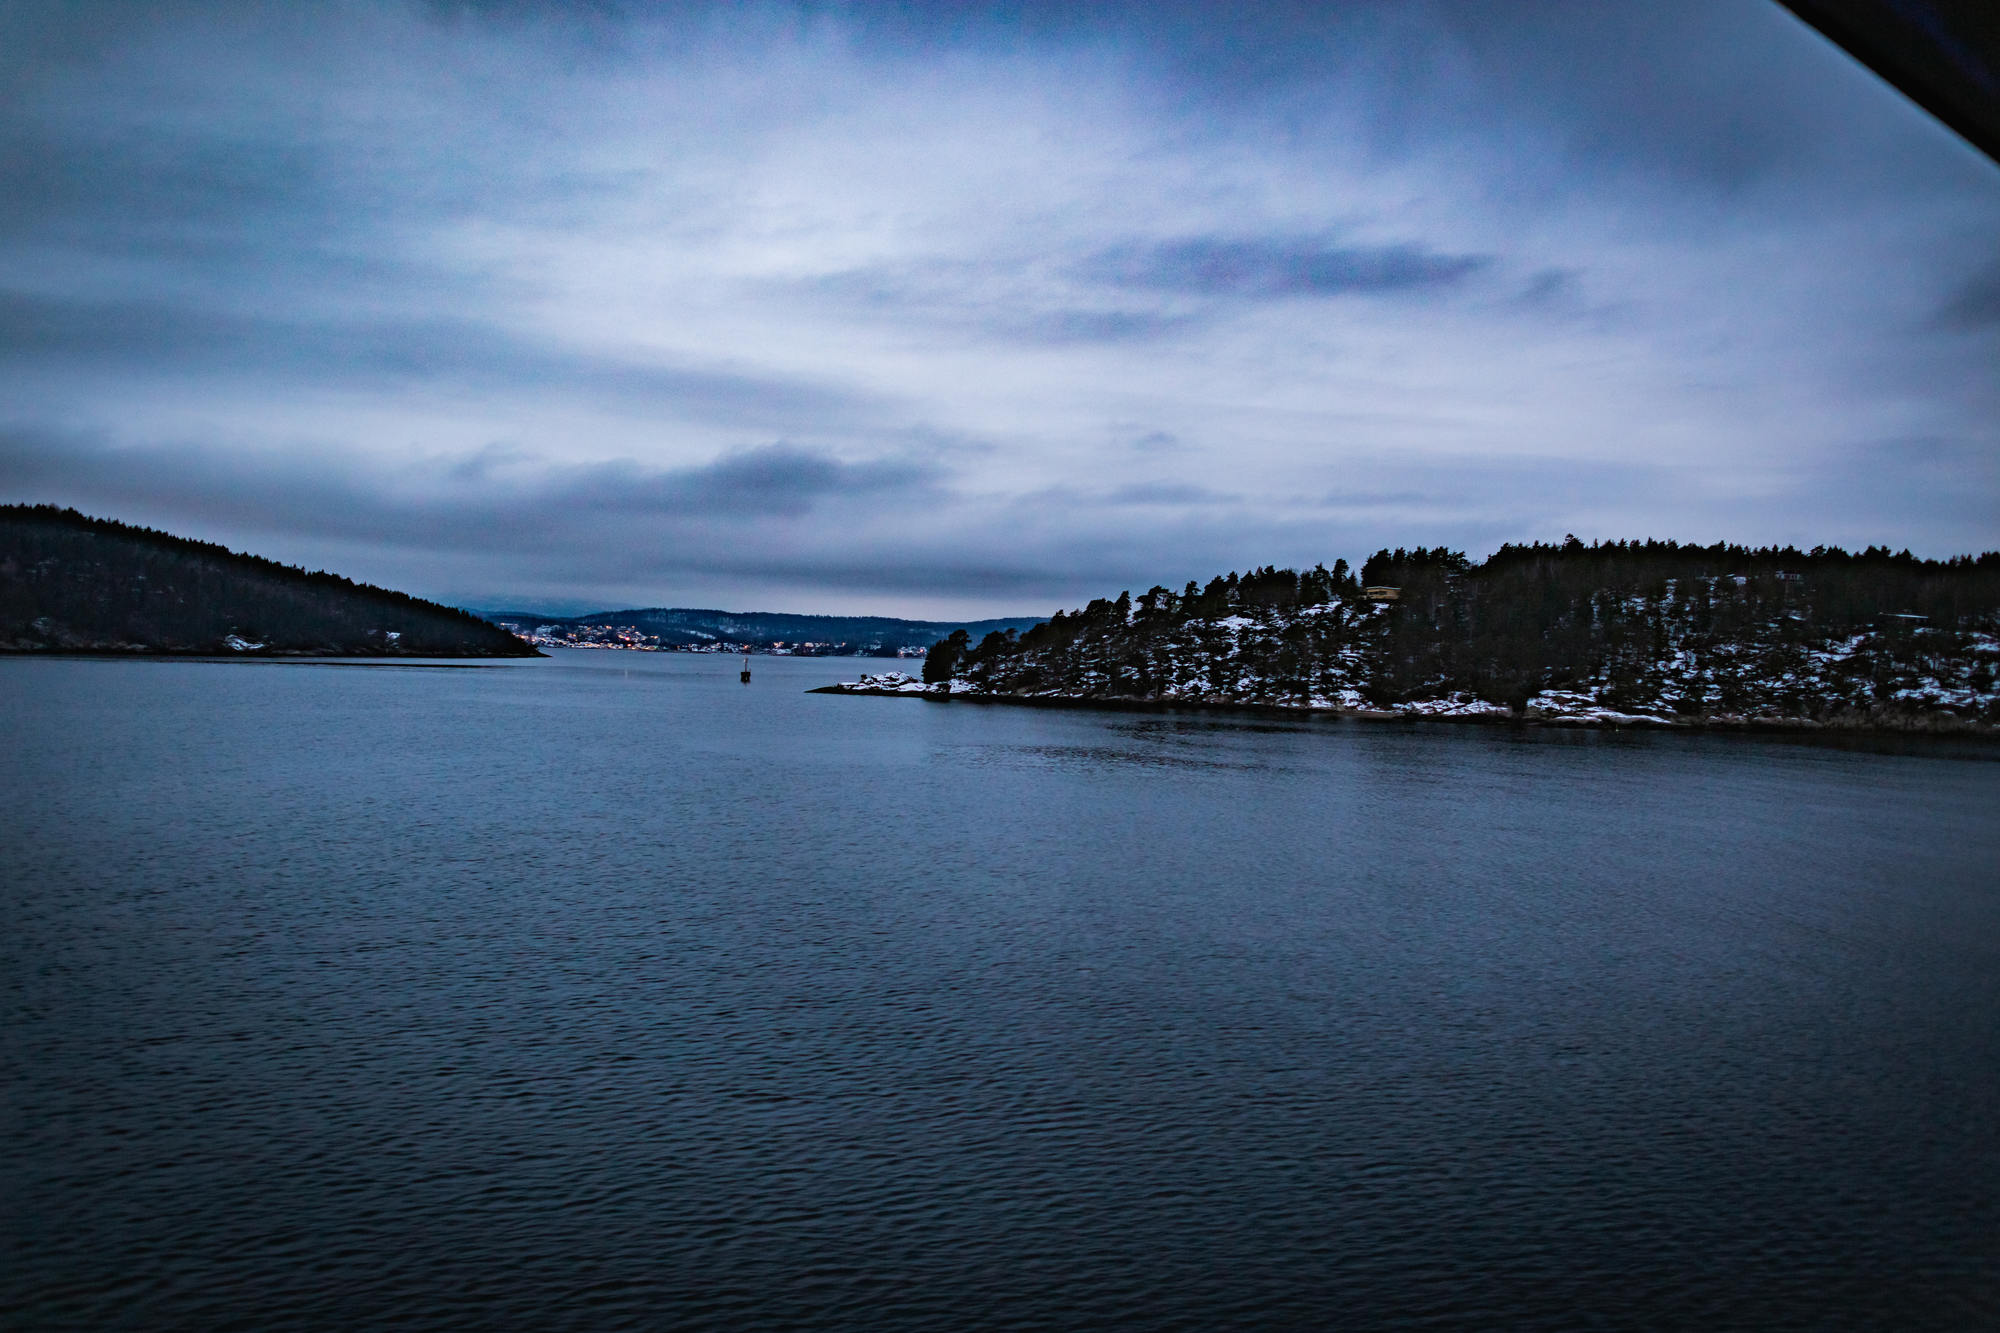 dfds-minicruise-oslo-christmas-time-travel-photography-07